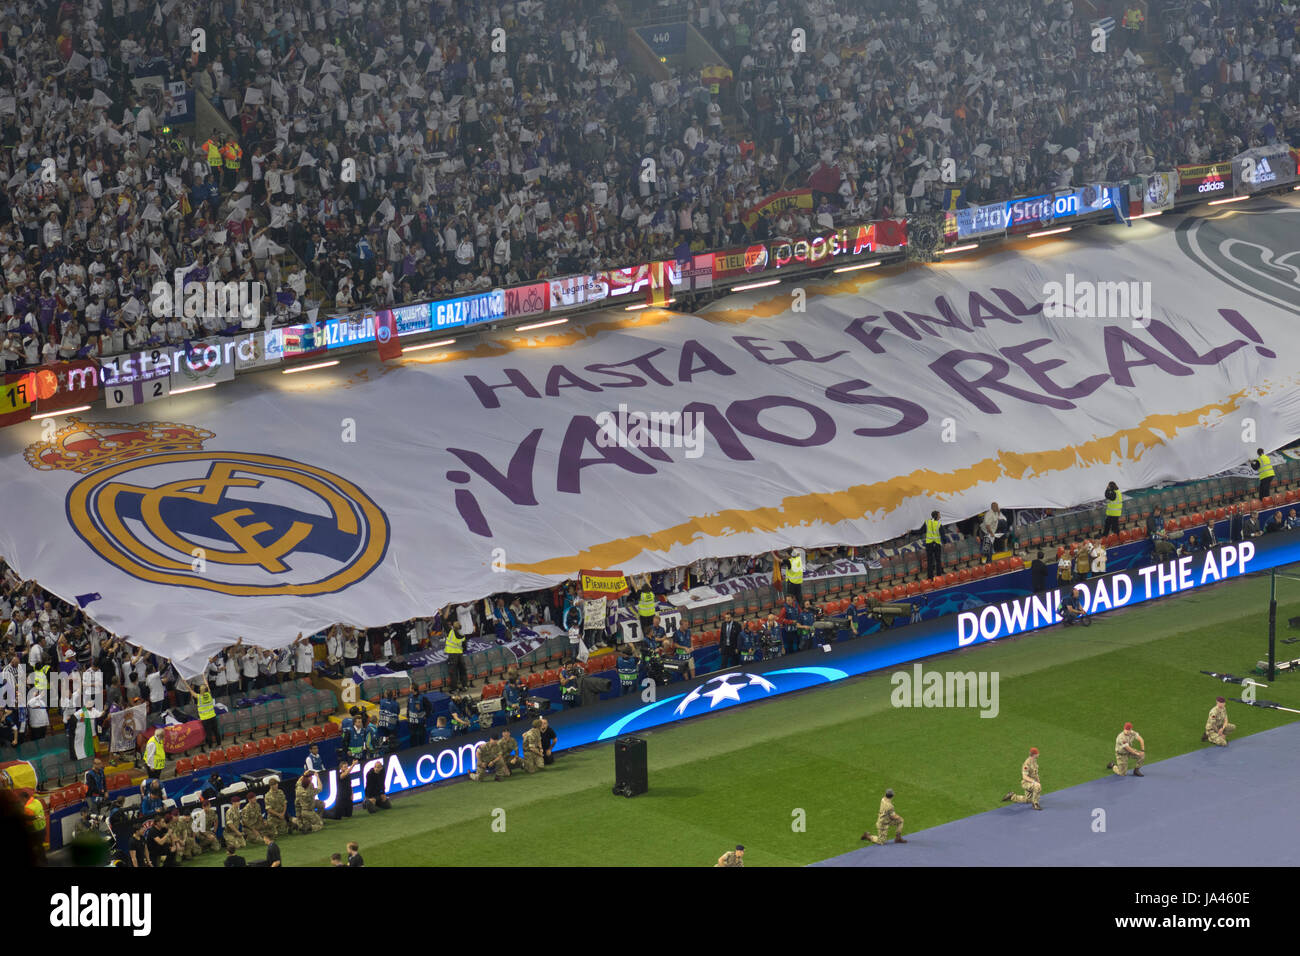 Madrid fans at the opening ceremony of the UEFA League Final between Madrid and Juventus in Cardiff,Wales,UK Stock - Alamy